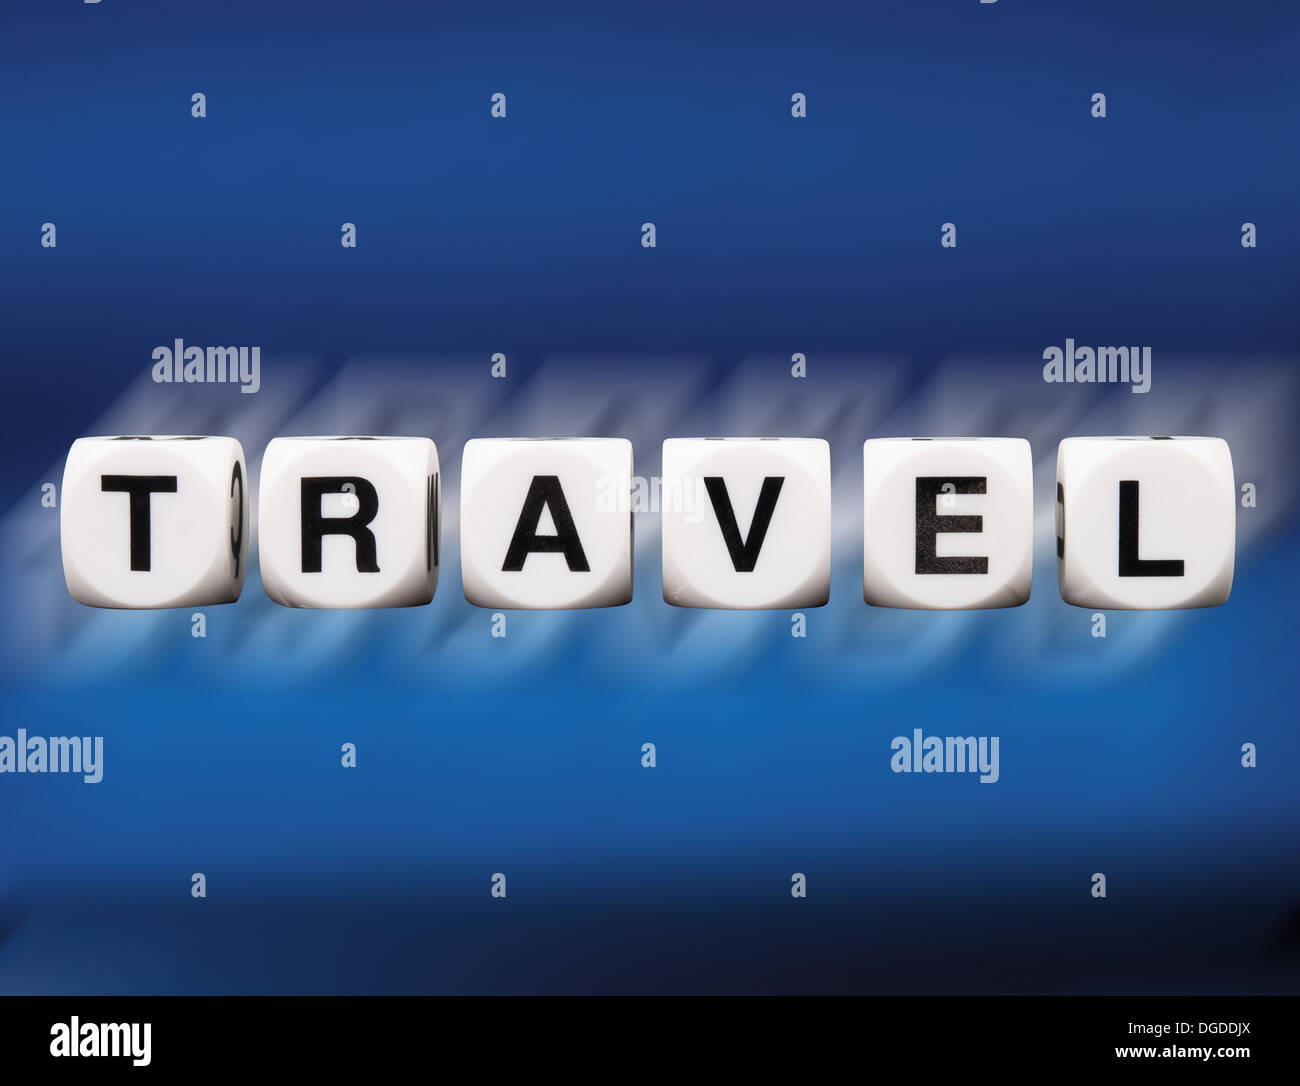 travel spelled in dice letters reflected on blue background in motion blur Stock Photo